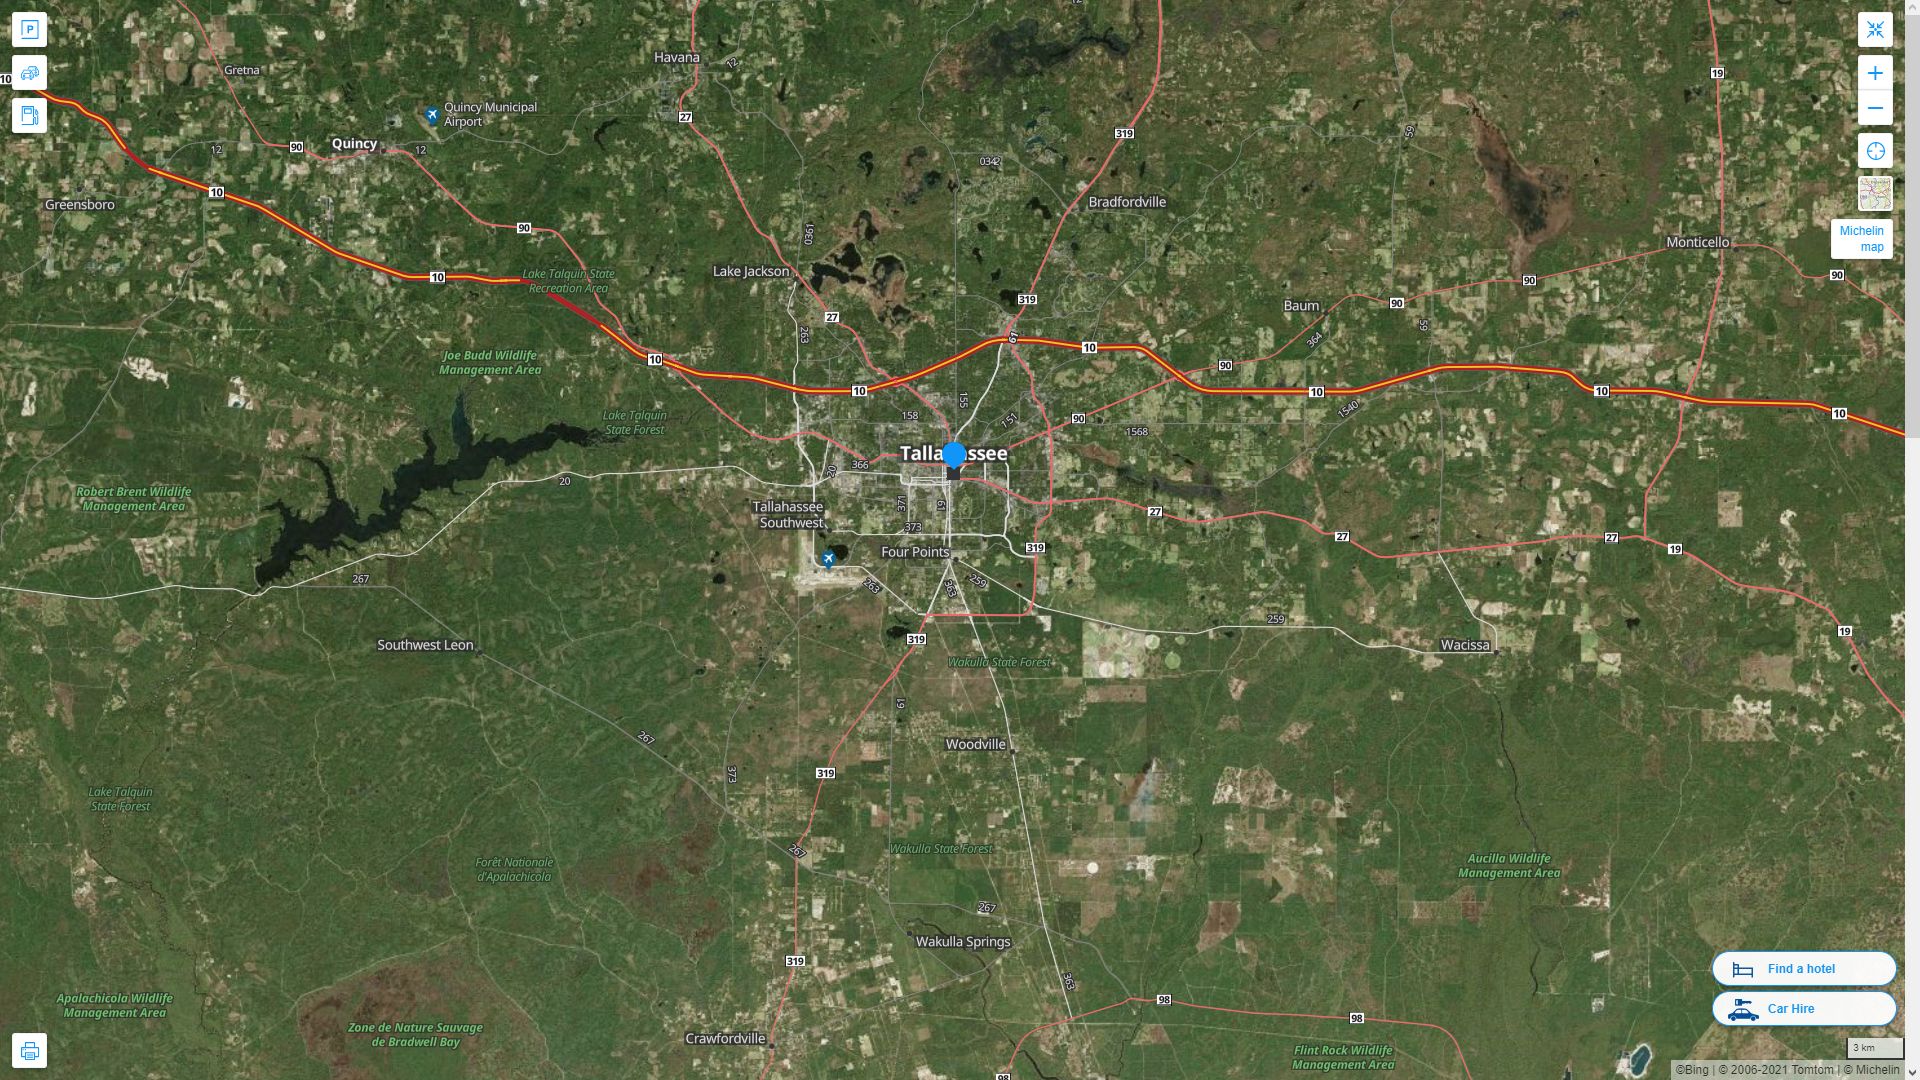 Tallahassee Florida Highway and Road Map with Satellite View